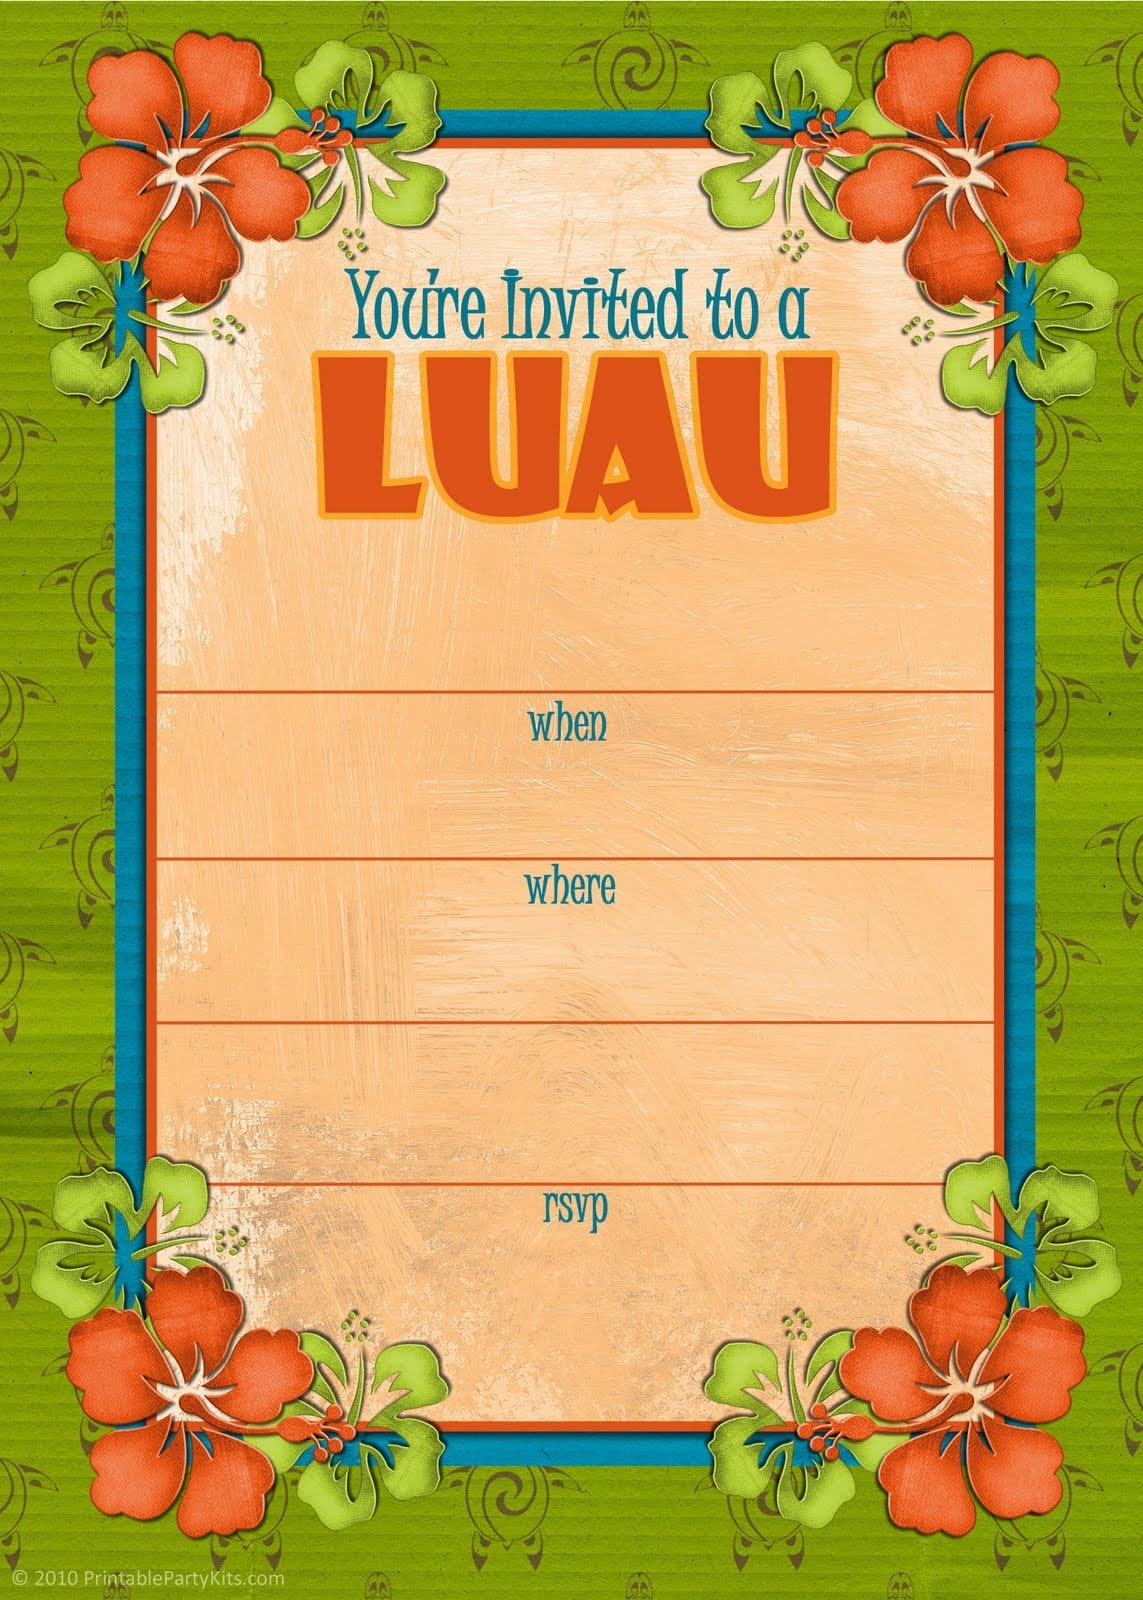 4 Excellent Luau Party Invitations Free Templates